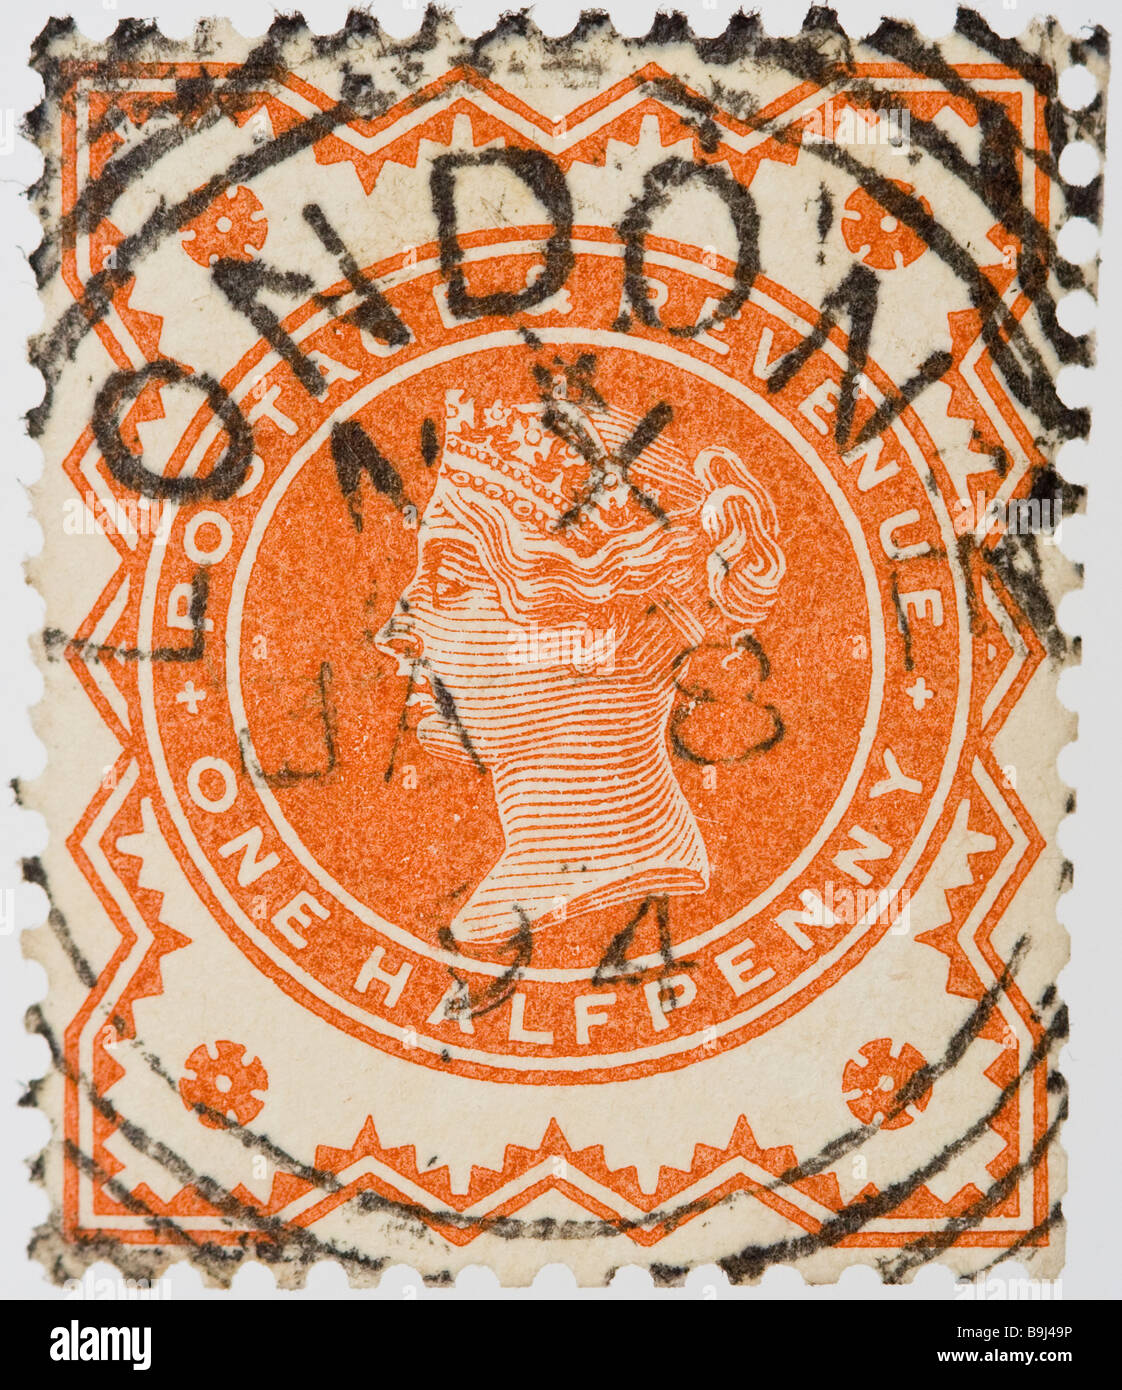 Close up of ½d, one half penny orange Victorian British Postal stamp on white background issued between 1887-1900, Jubilee Issue. Used. London 1894. Stock Photo